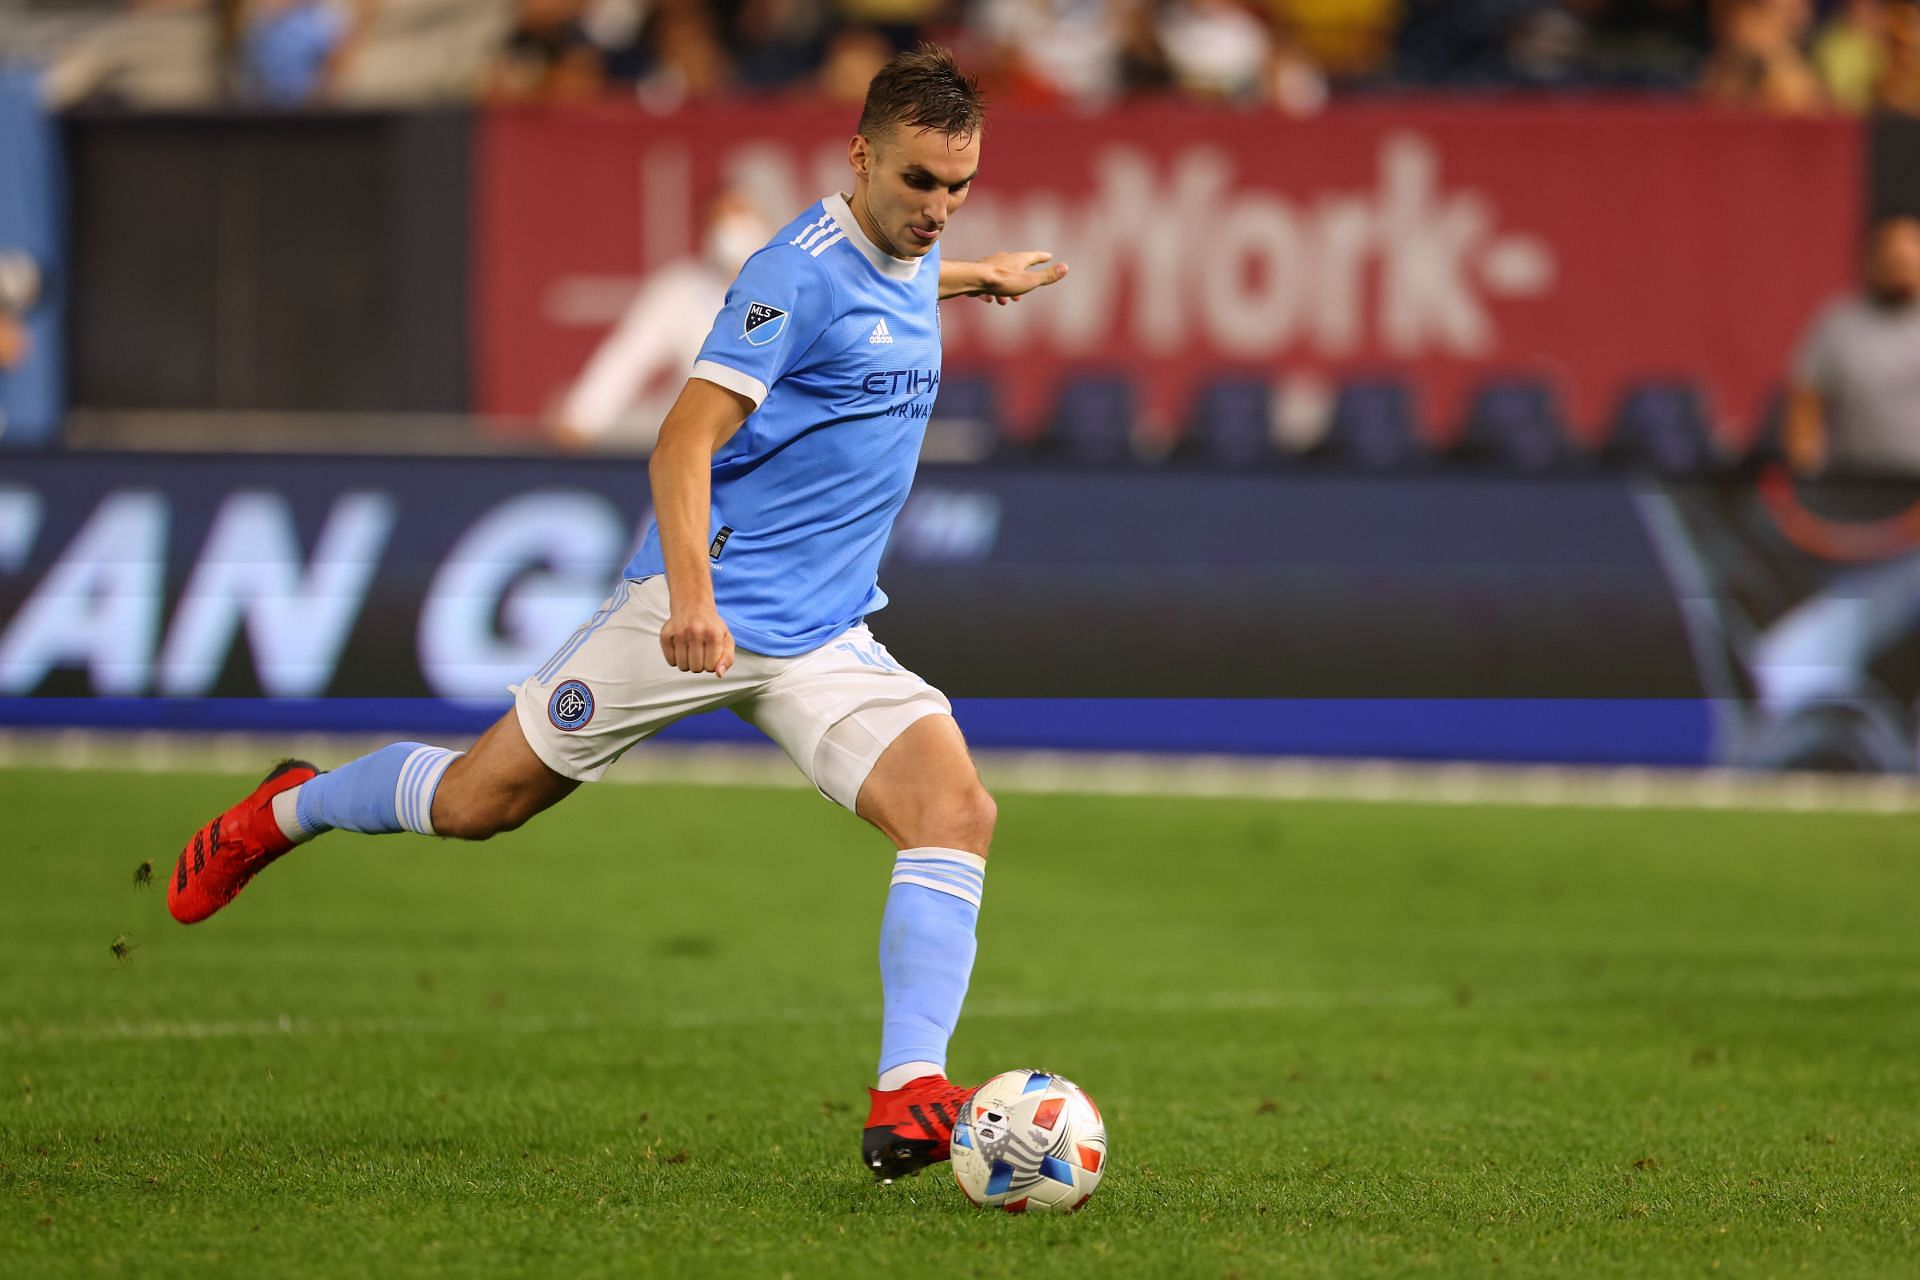 New York City FC will take on Chicago Fire in their upcoming MLS fixture on Sunday